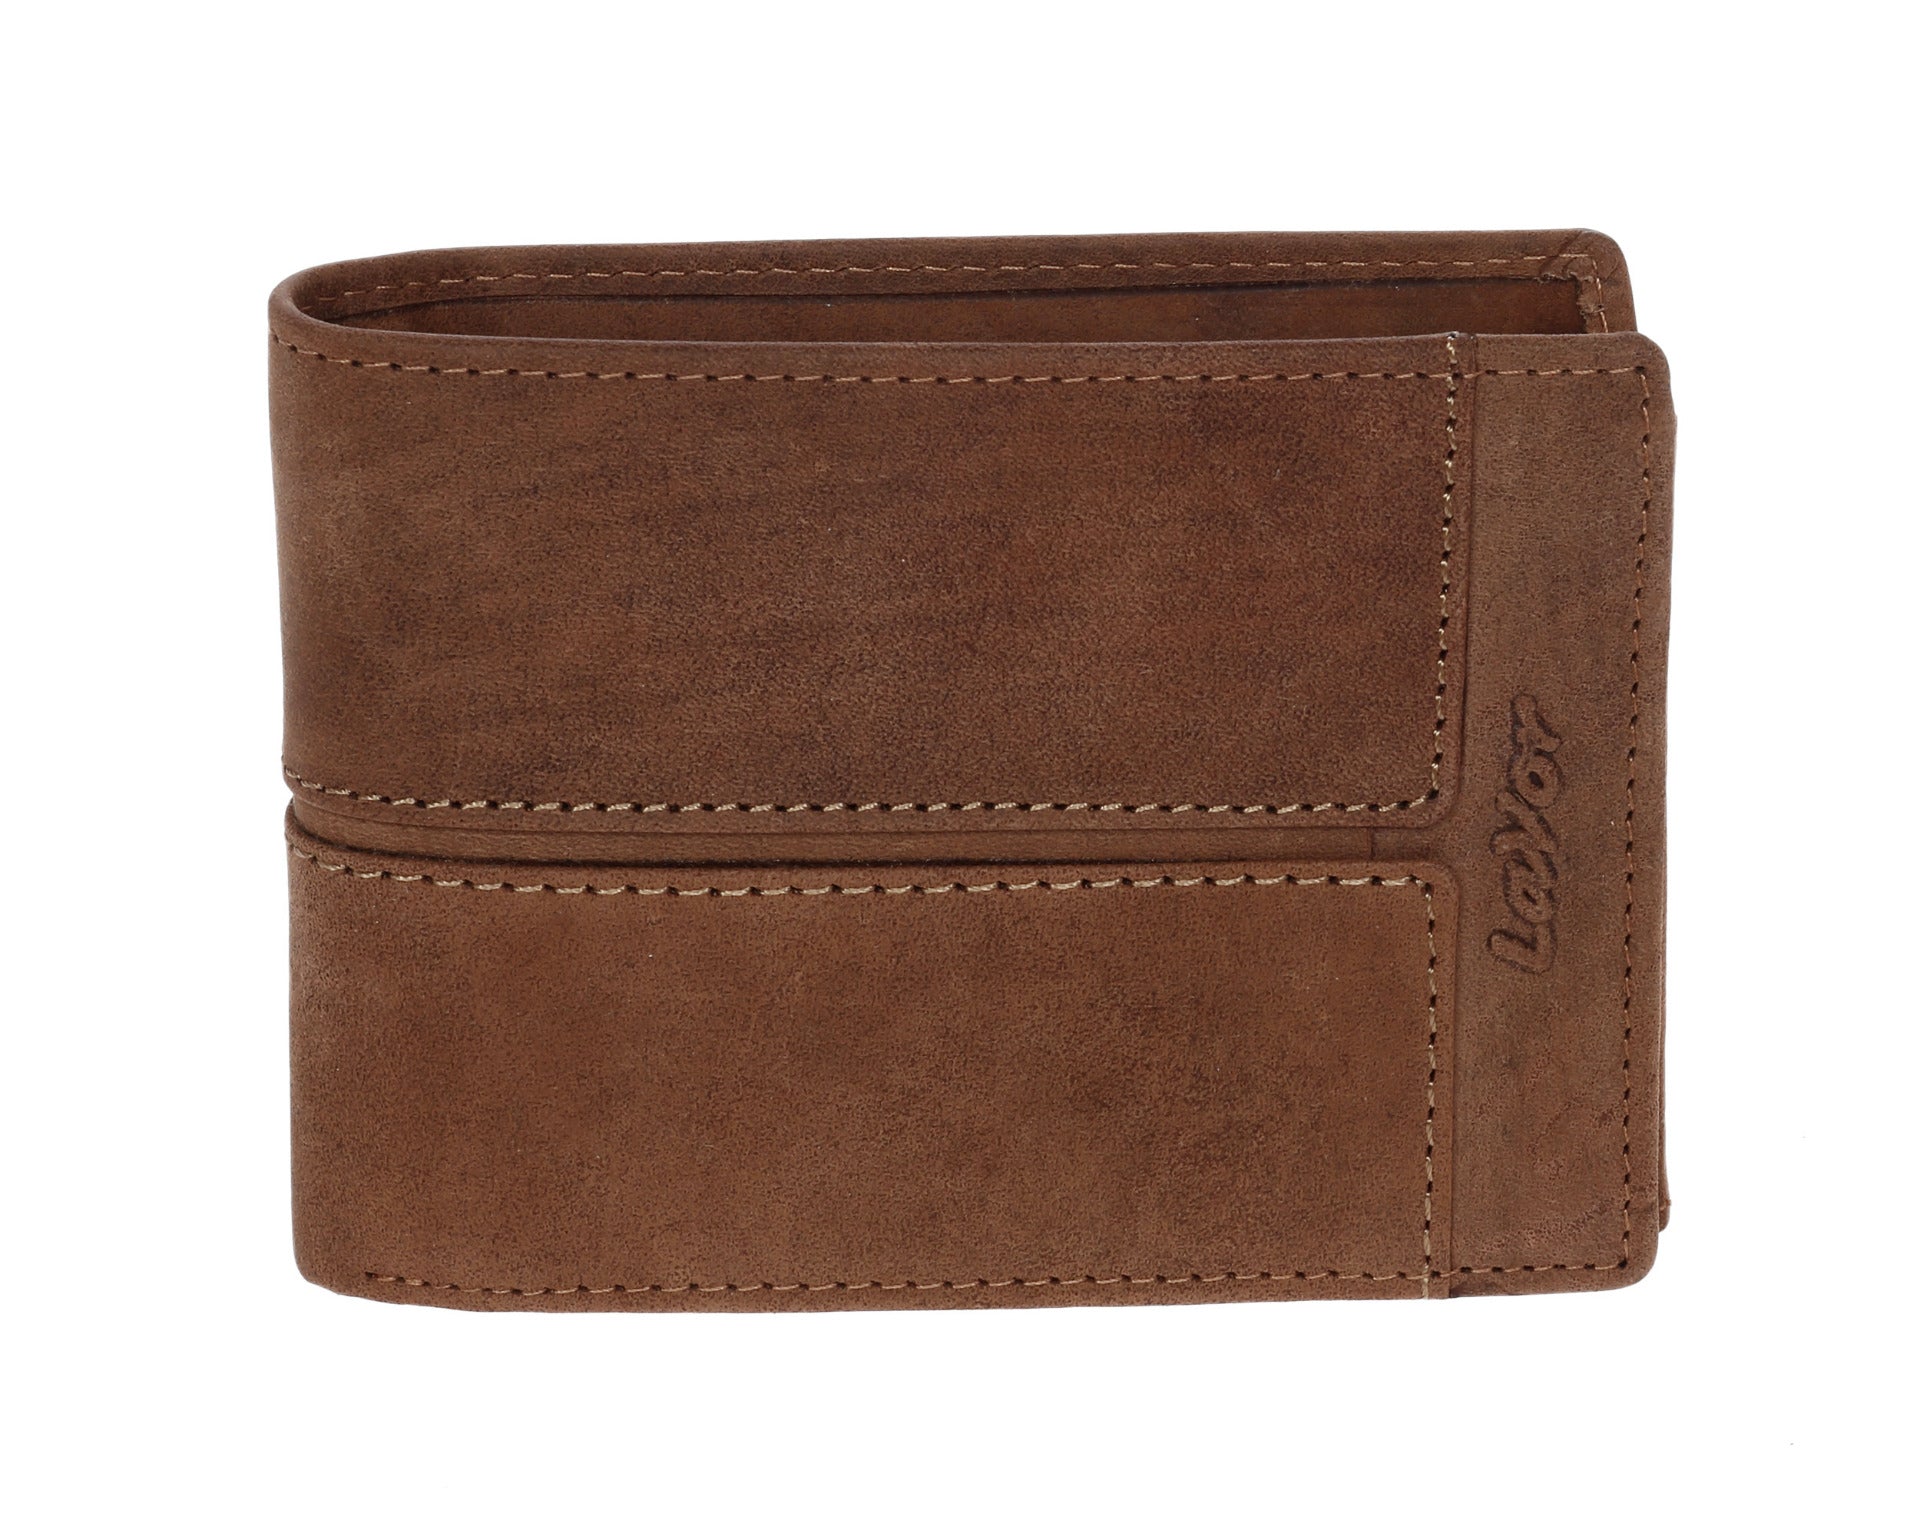 Suede,leather wallet in light brown colour. 3712